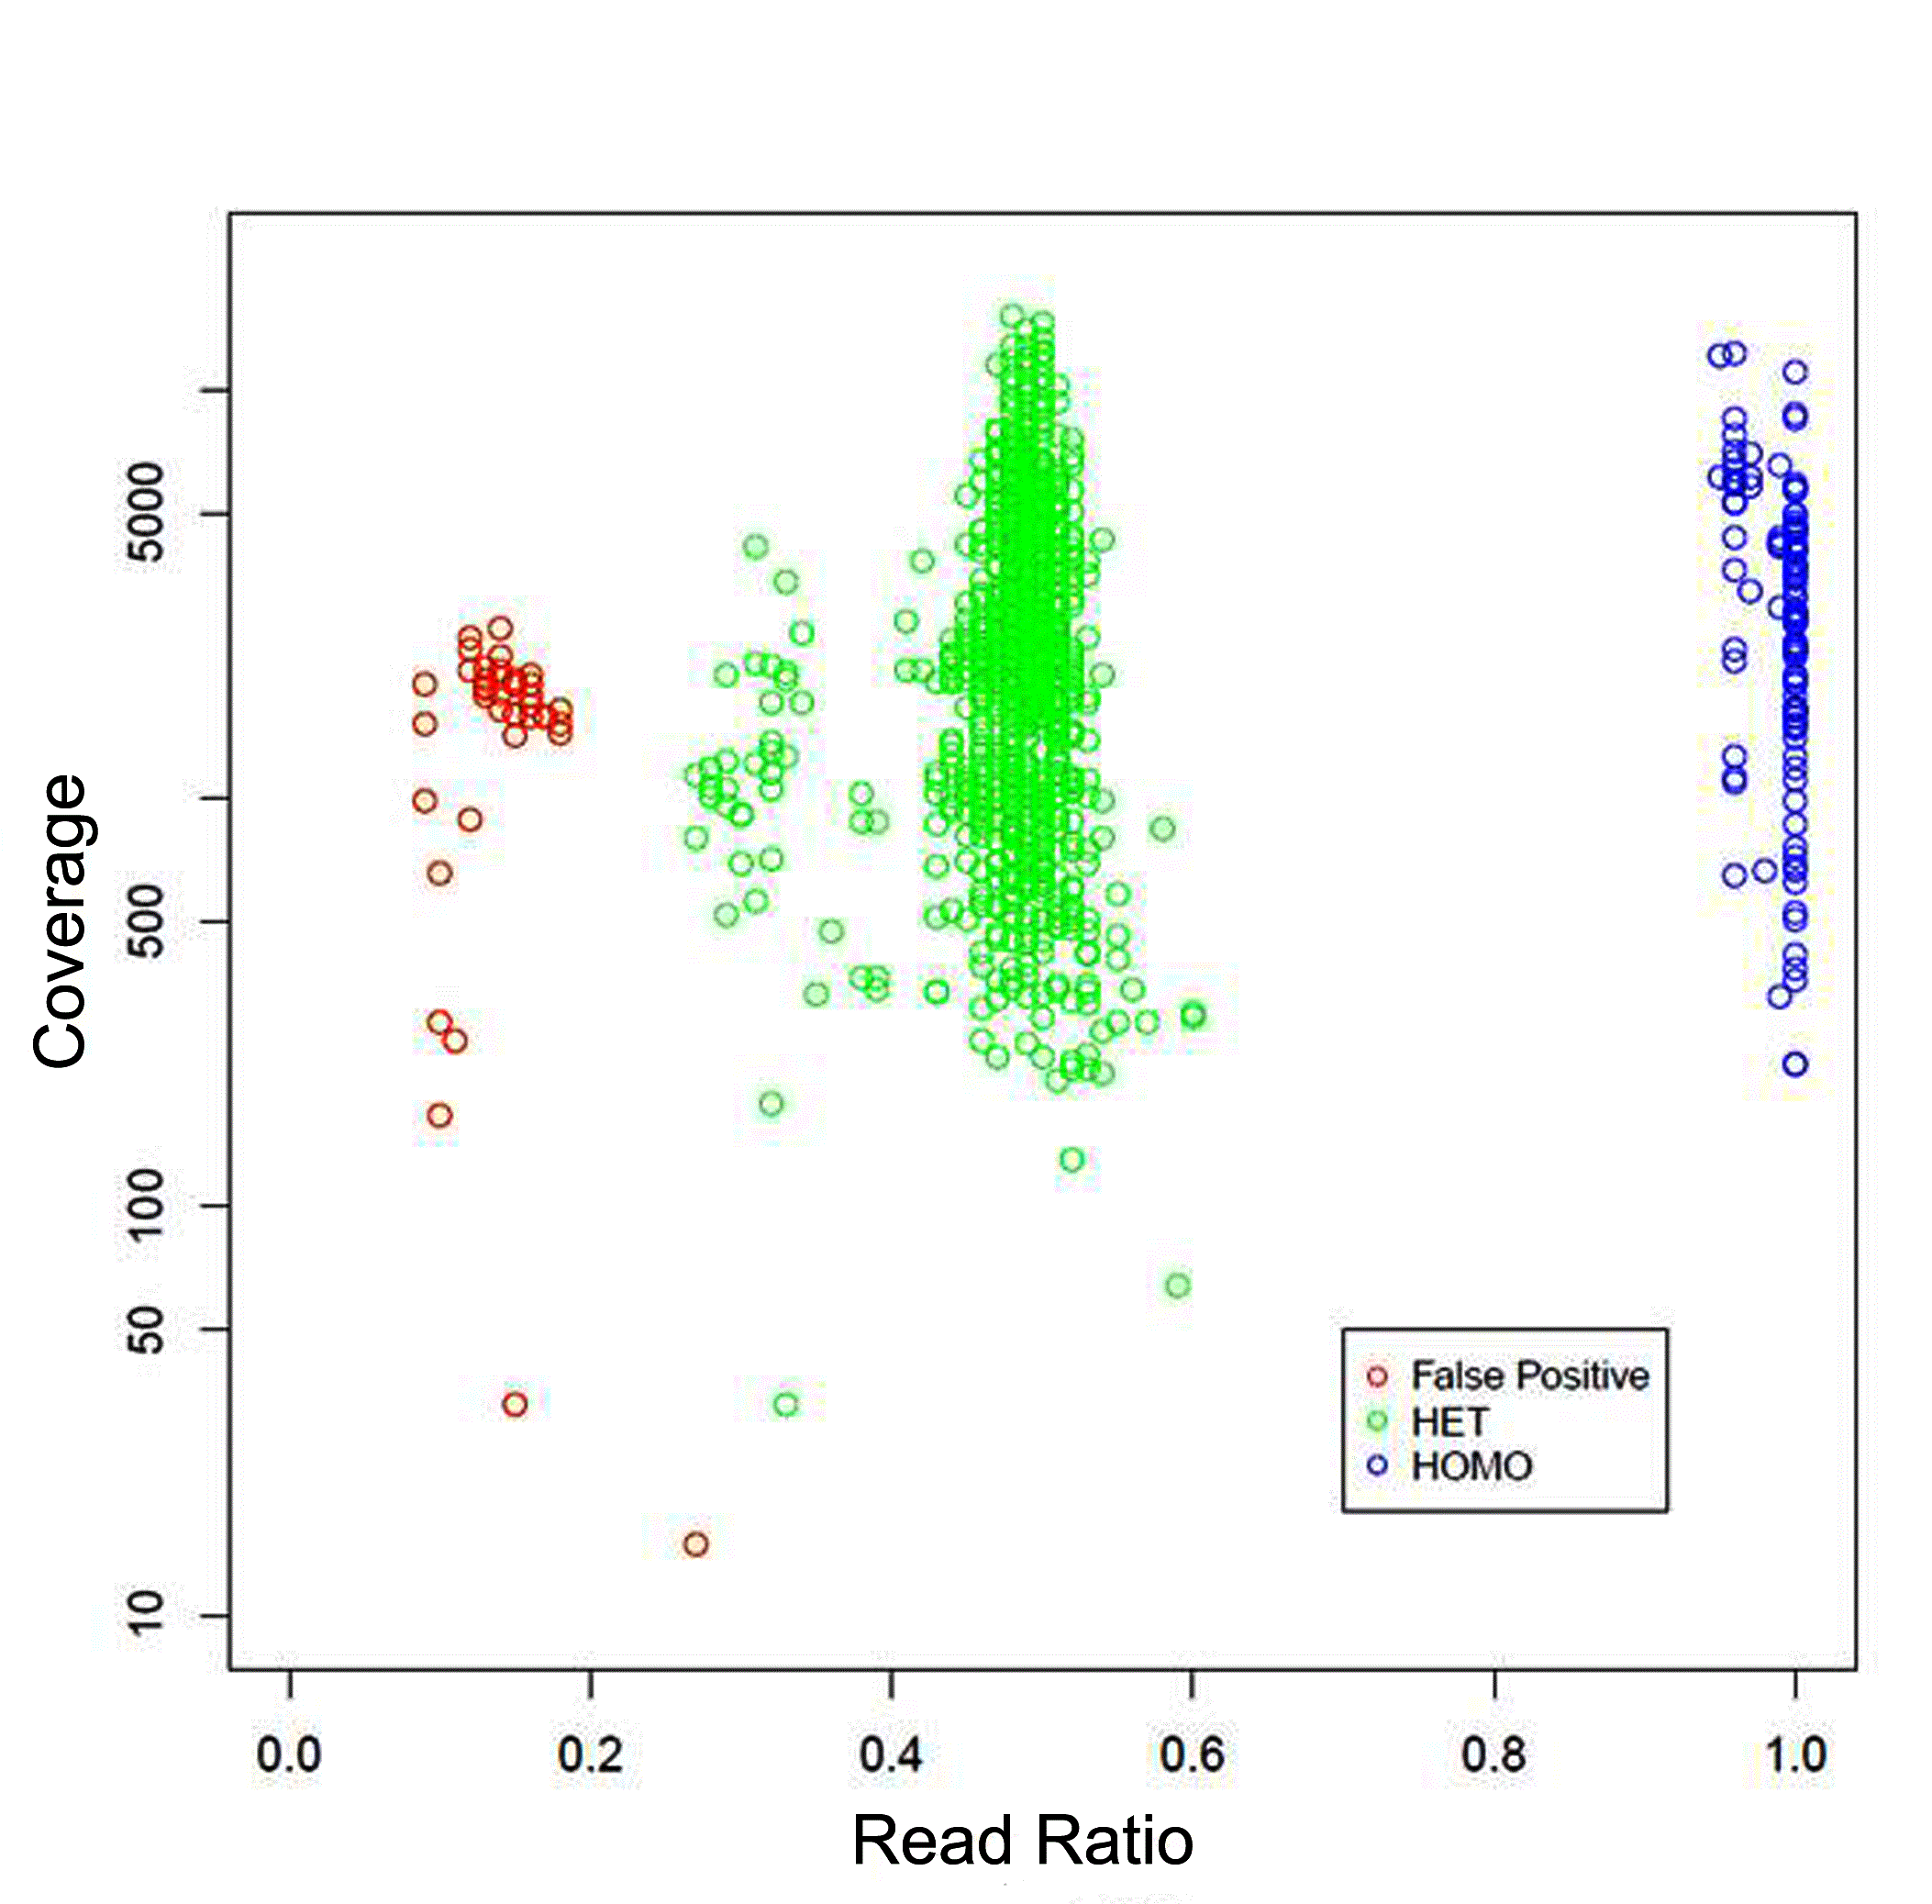 Figure 3: Variant read ratio vs. read coverage in first 2,000 samples